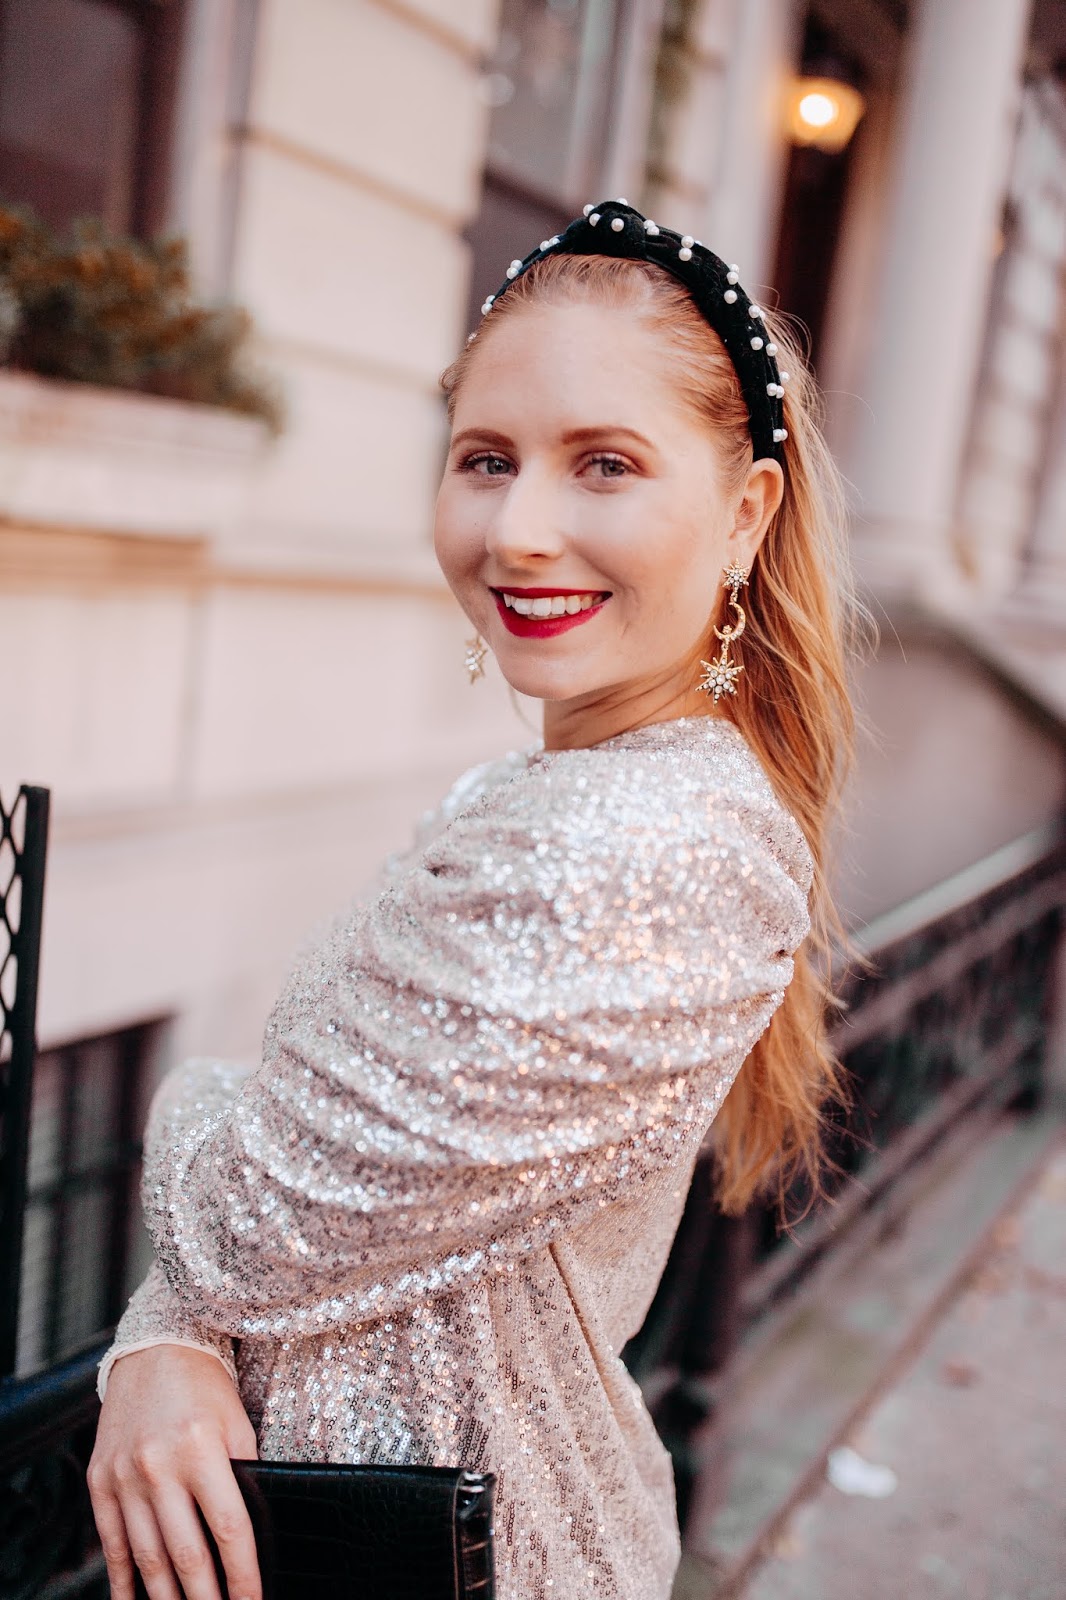 How to Style Sequins for New Year's Eve.1. Sequin Dress + Faux Fur Jackets.2. Sequin Skirt + Cropped Chenille Eyelash Sweaters. H&M Sweaters. Forever 21 Chenille Sweaters. Sequin Pants from Express. Sequin Skirts from Express.